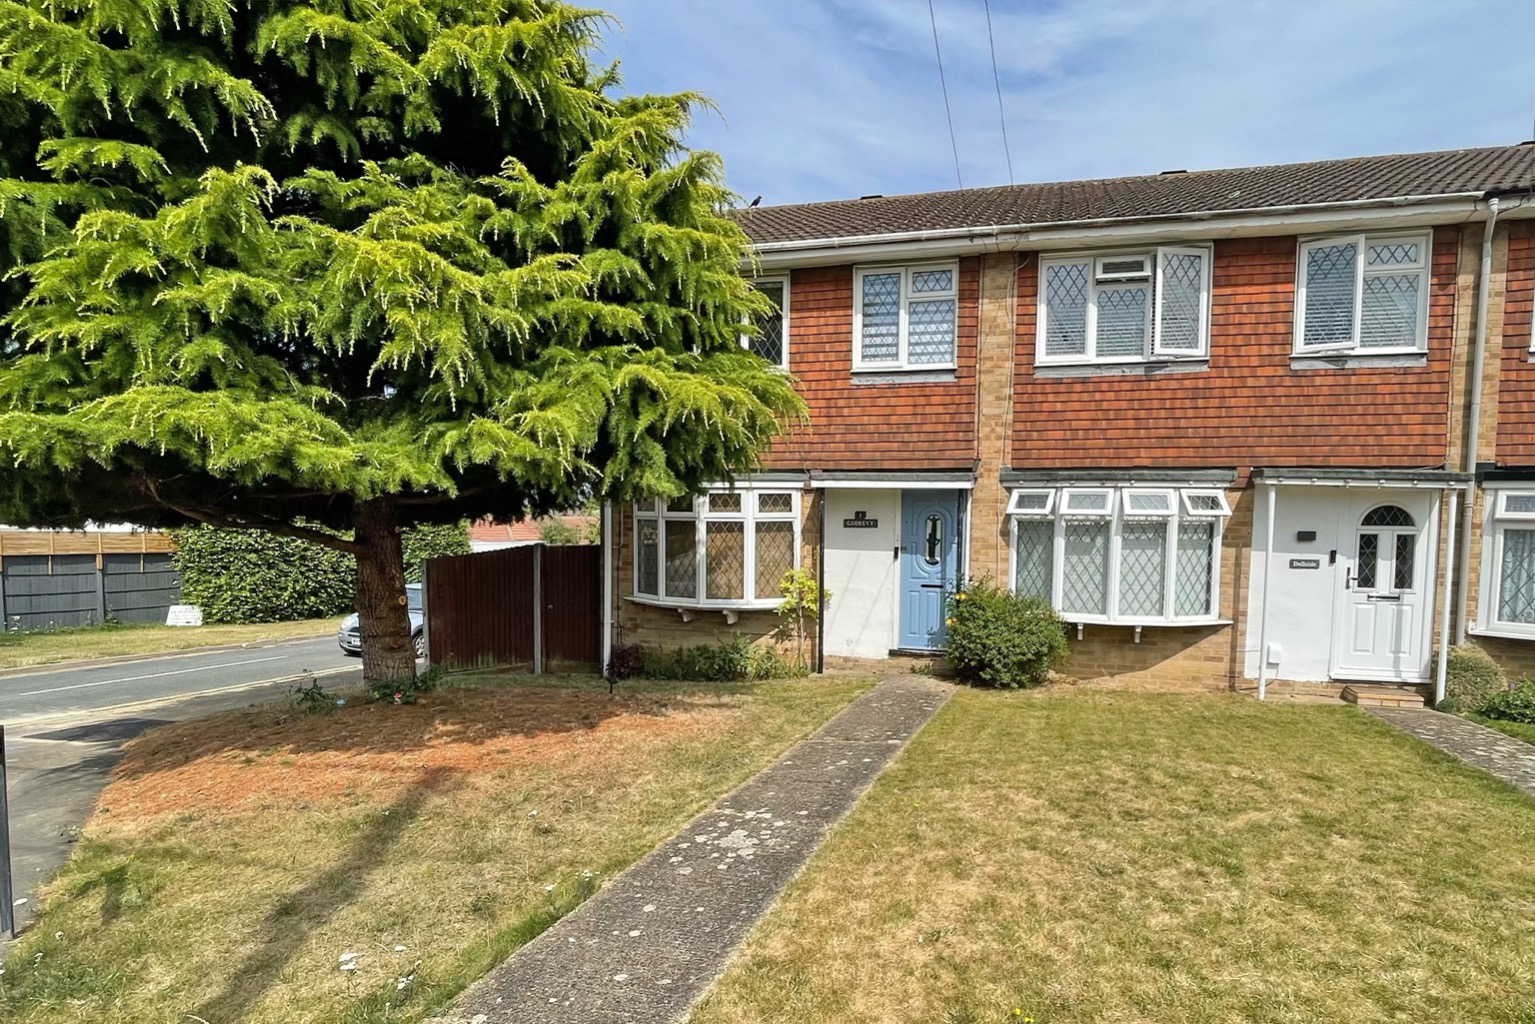 3 bed end of terrace house for sale in Cannon Lane, Maidenhead, SL6 